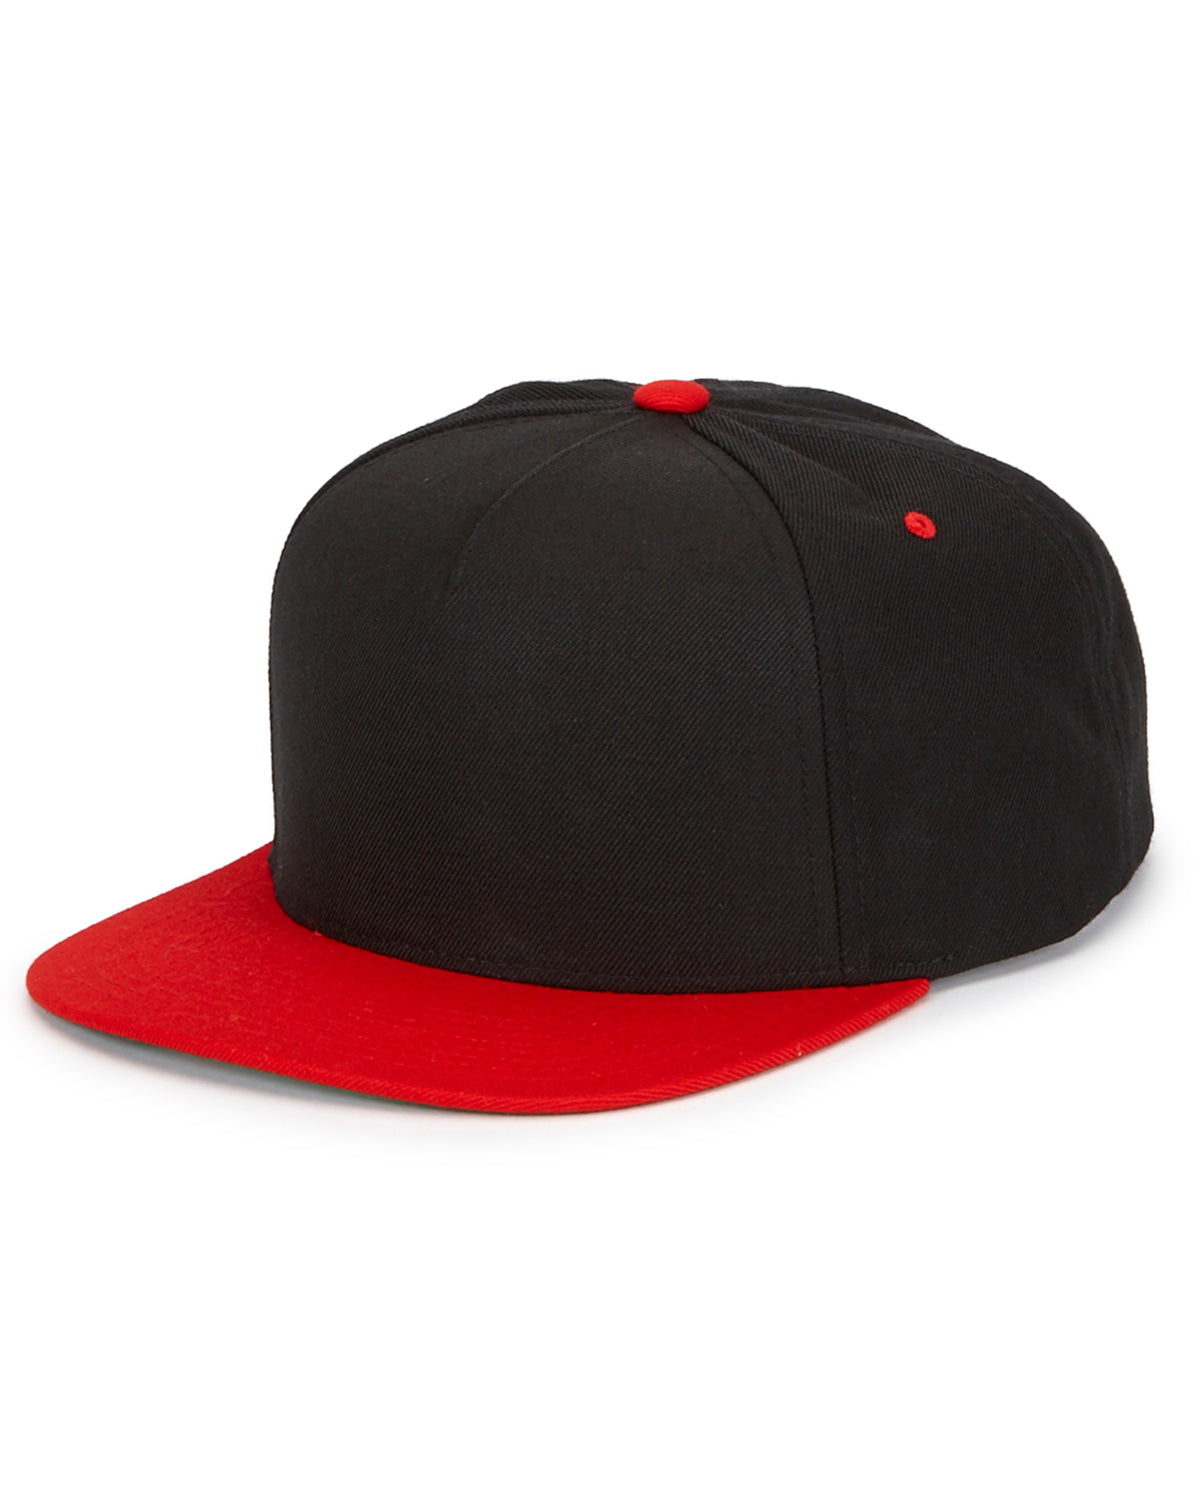 Cheap Affordable Custom Hats Caps Custom Leather and Wood Patches Engraved With Your Logo Hats Black Yupoong Red and Black